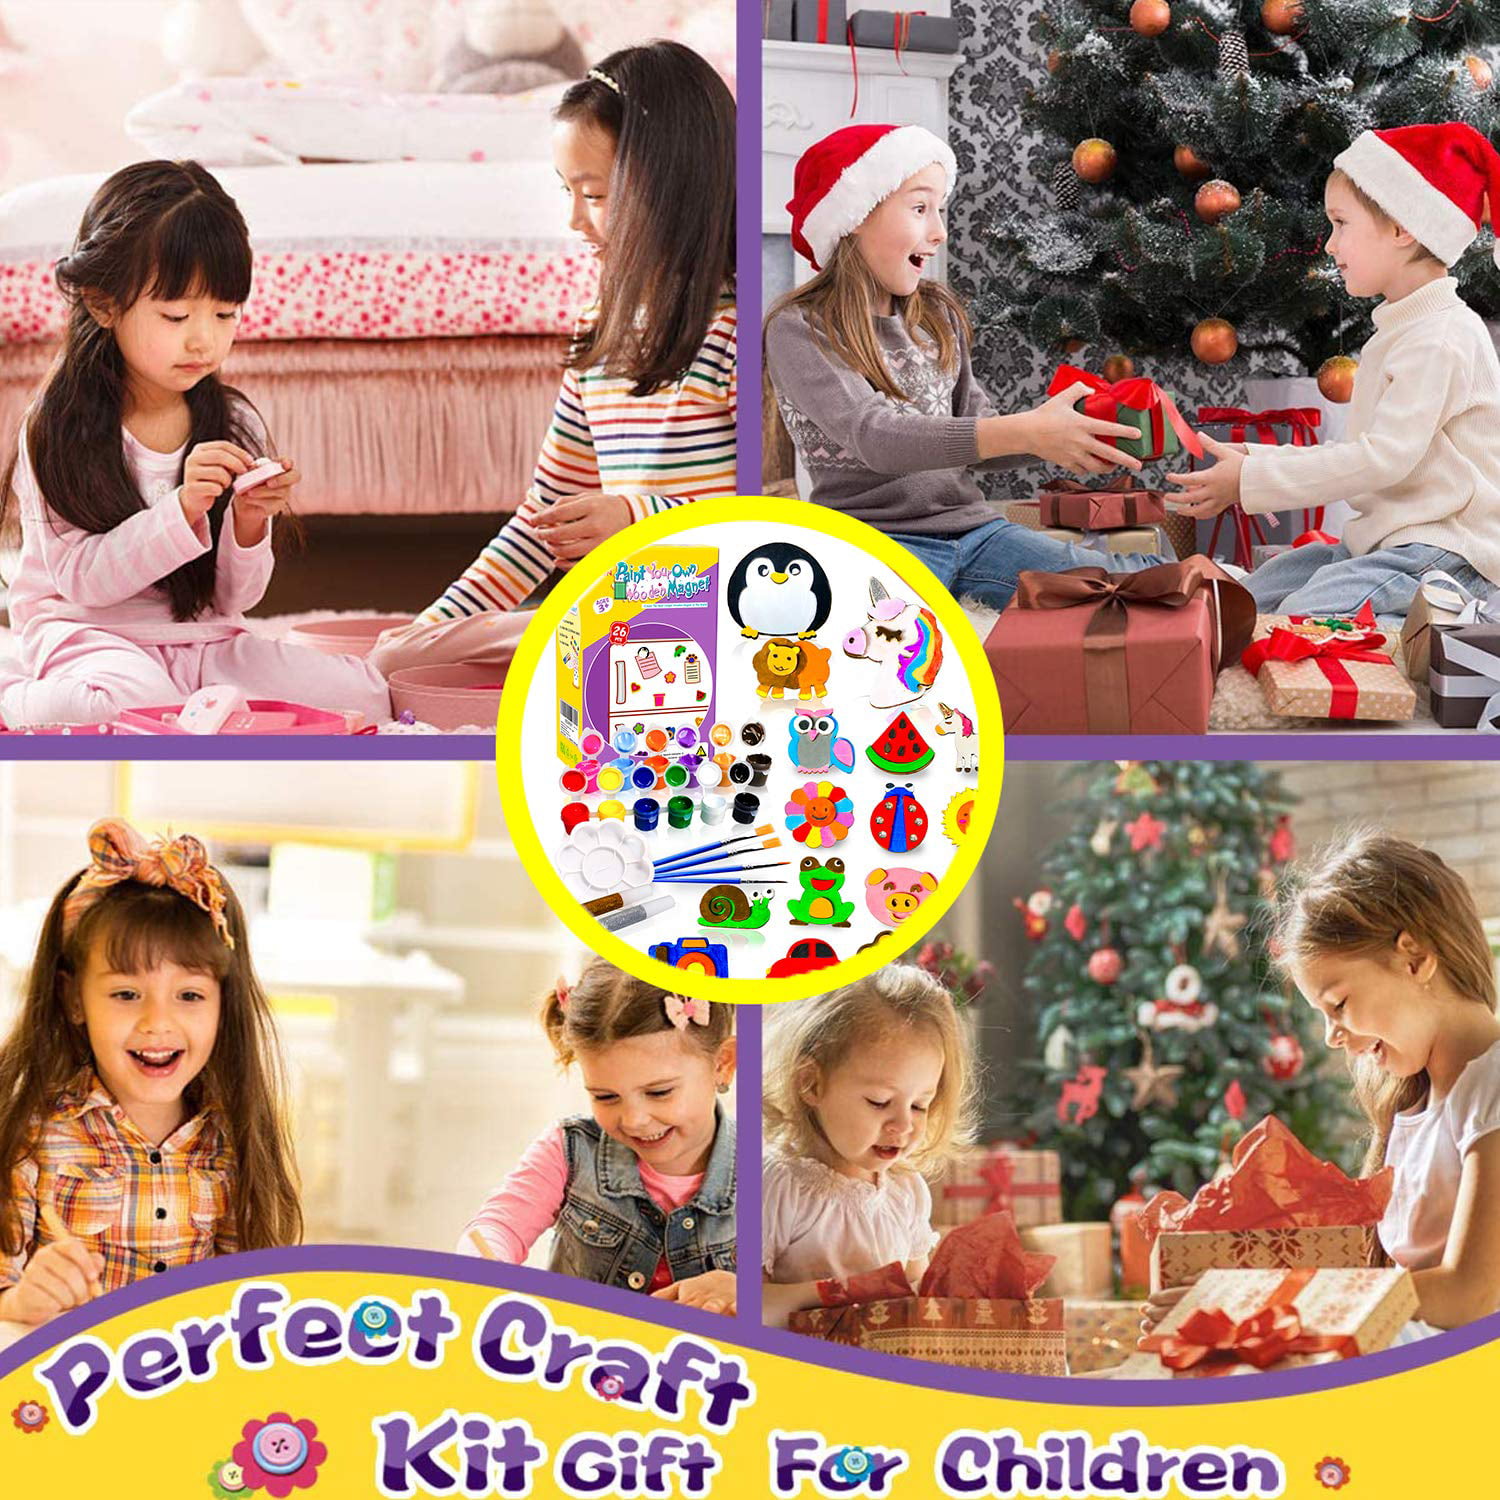 JOYIN joyin paint your own wooden magnet, 24 wood painting kits for kids  ages 4-12, arts and crafts for kids ages 8-12 for christma